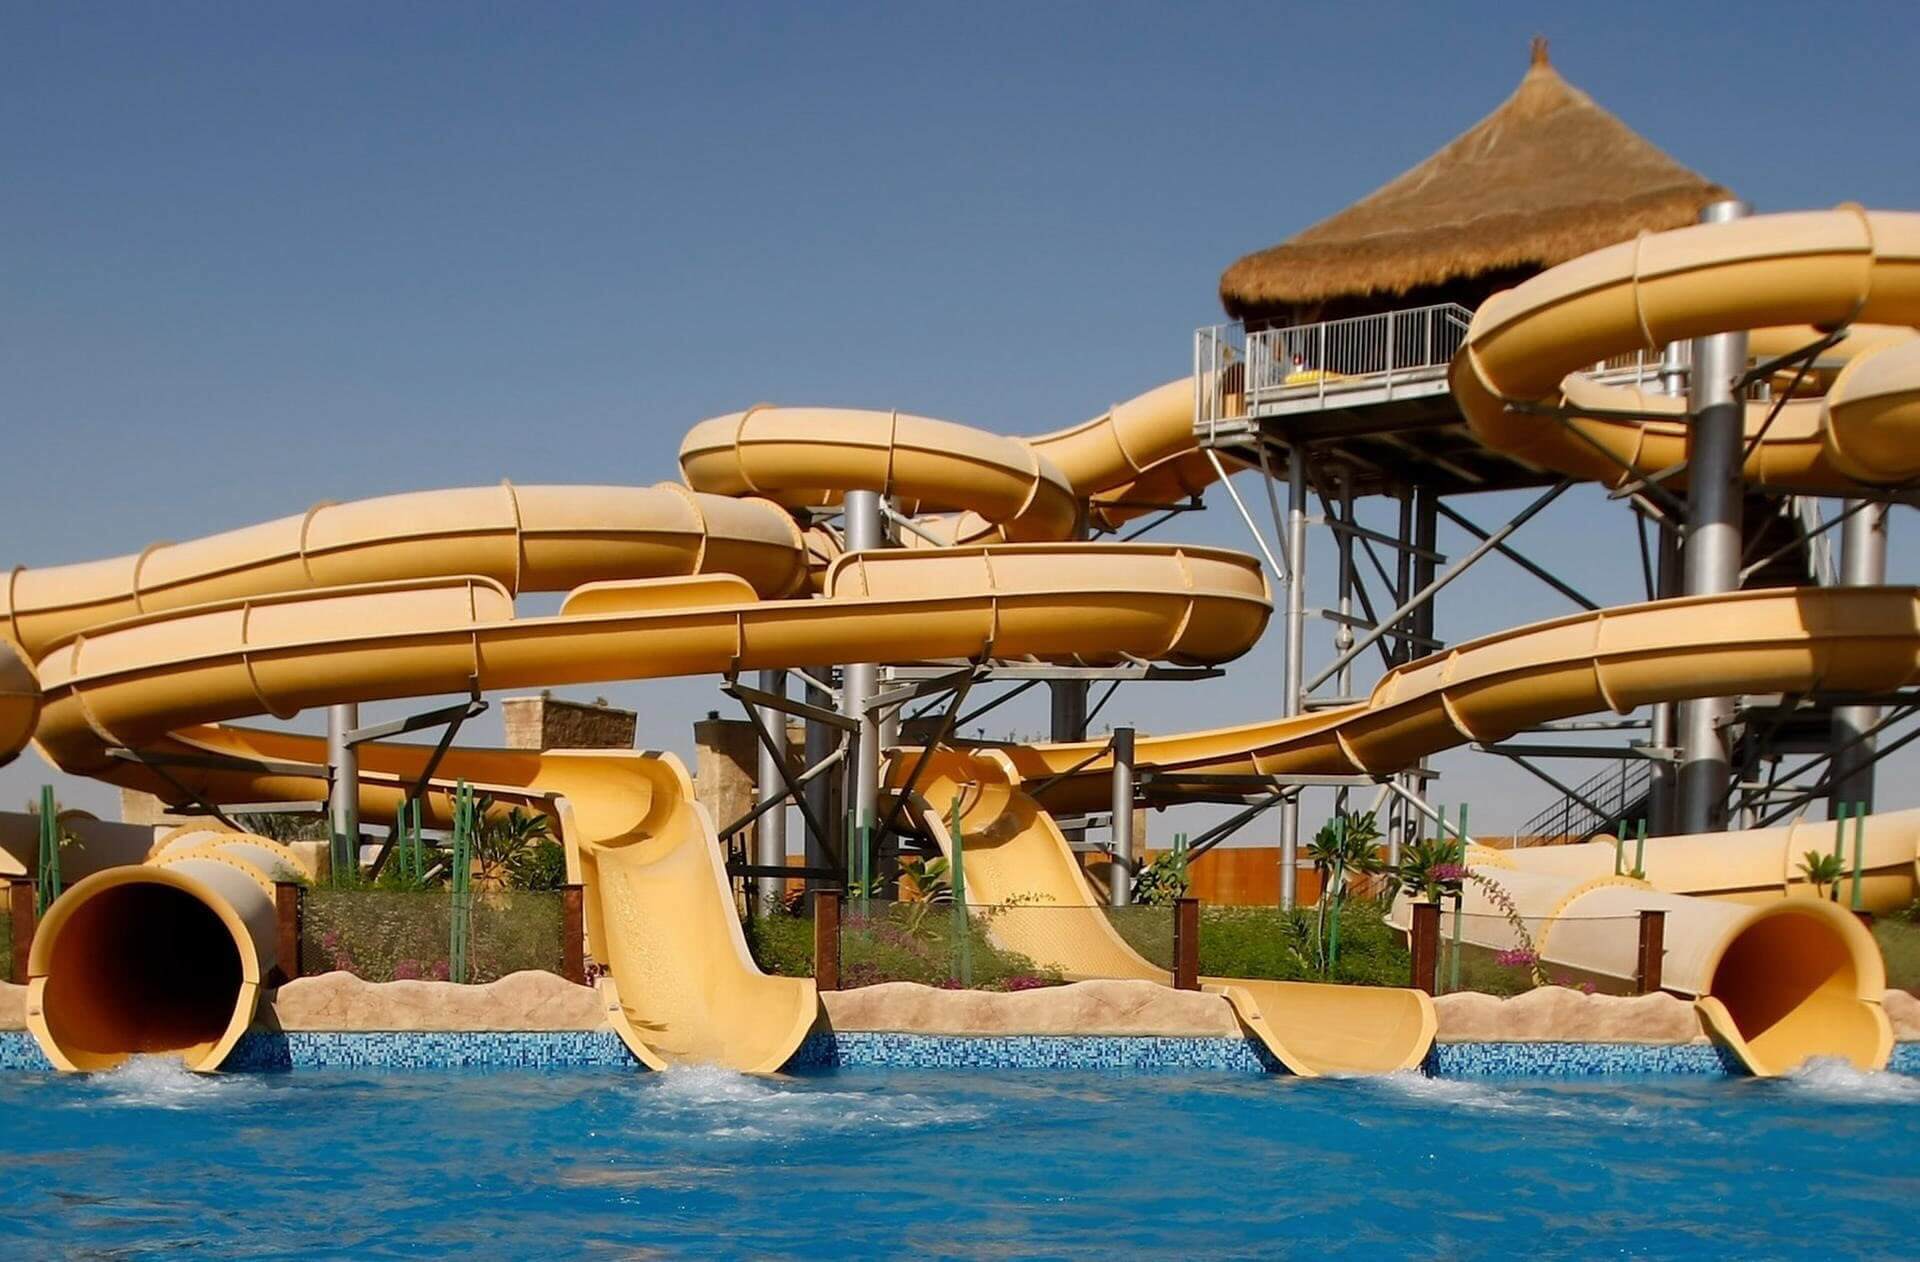 The Lost Paradise of Dilmun Water Park is Bahrainu2019s largest waterpark